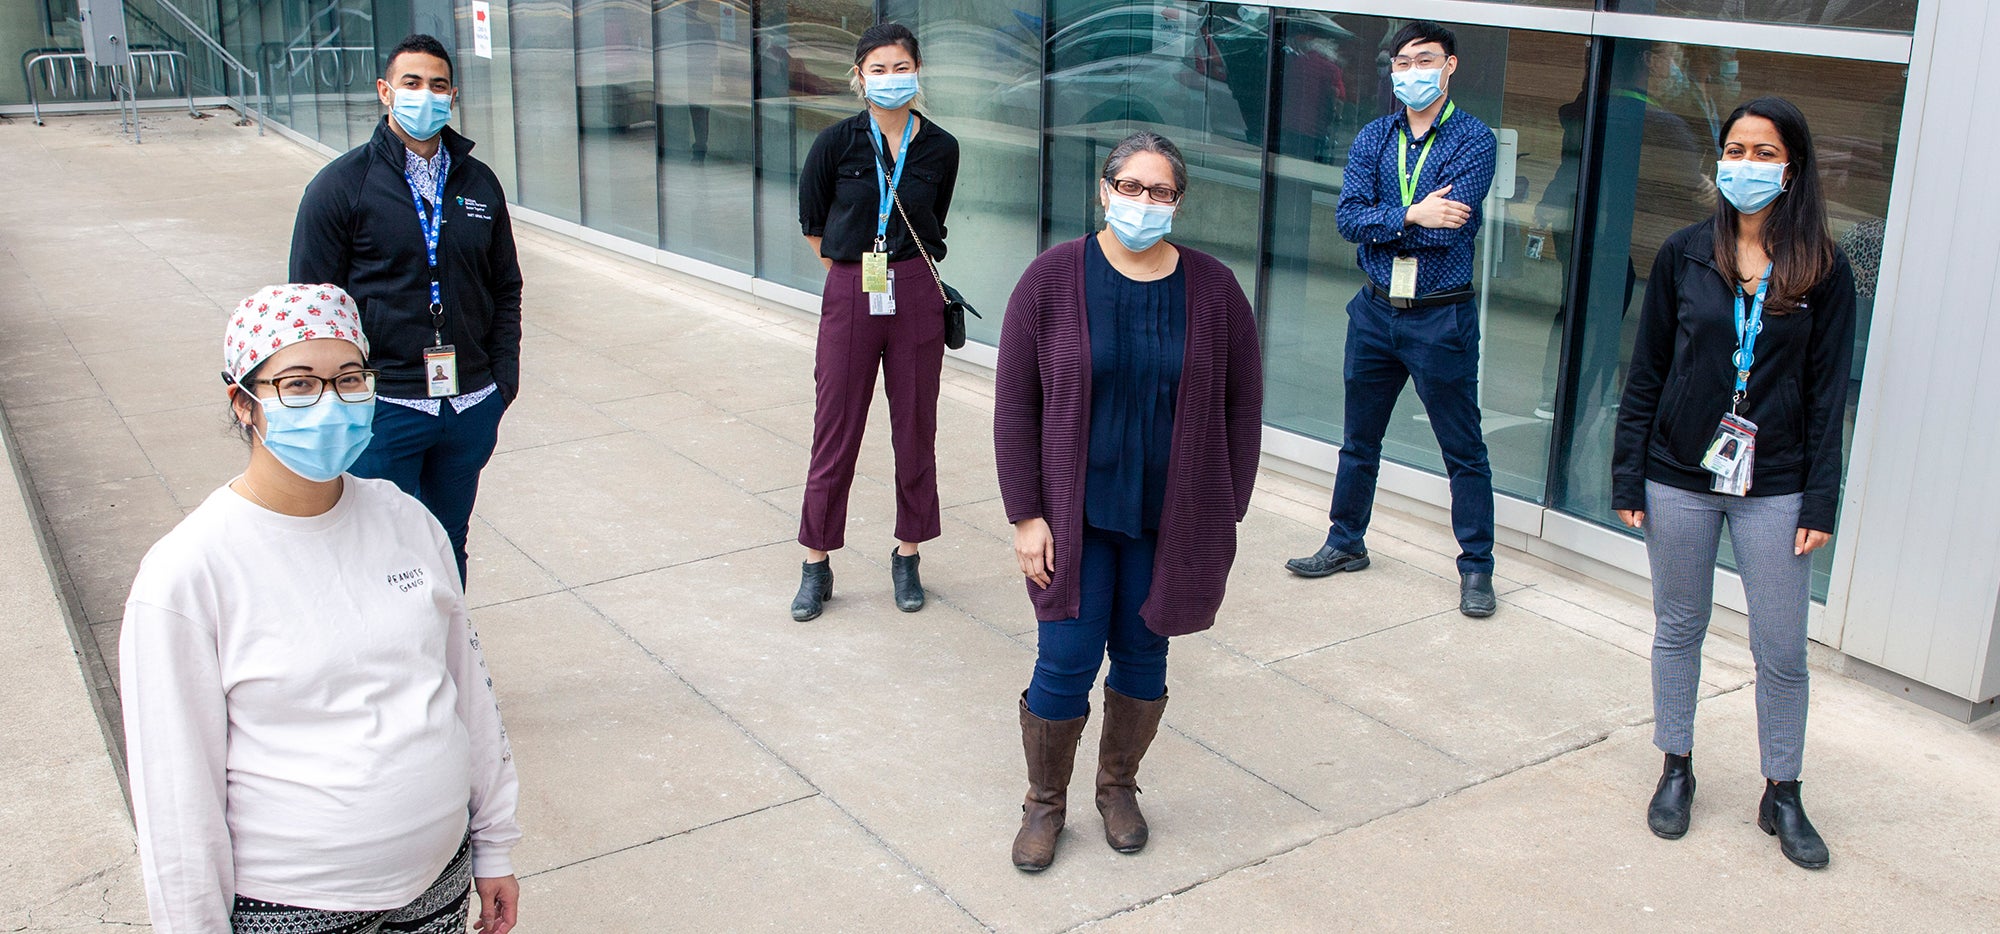 A team of healthcare providers wearing masks and socially distanced outside a hospital